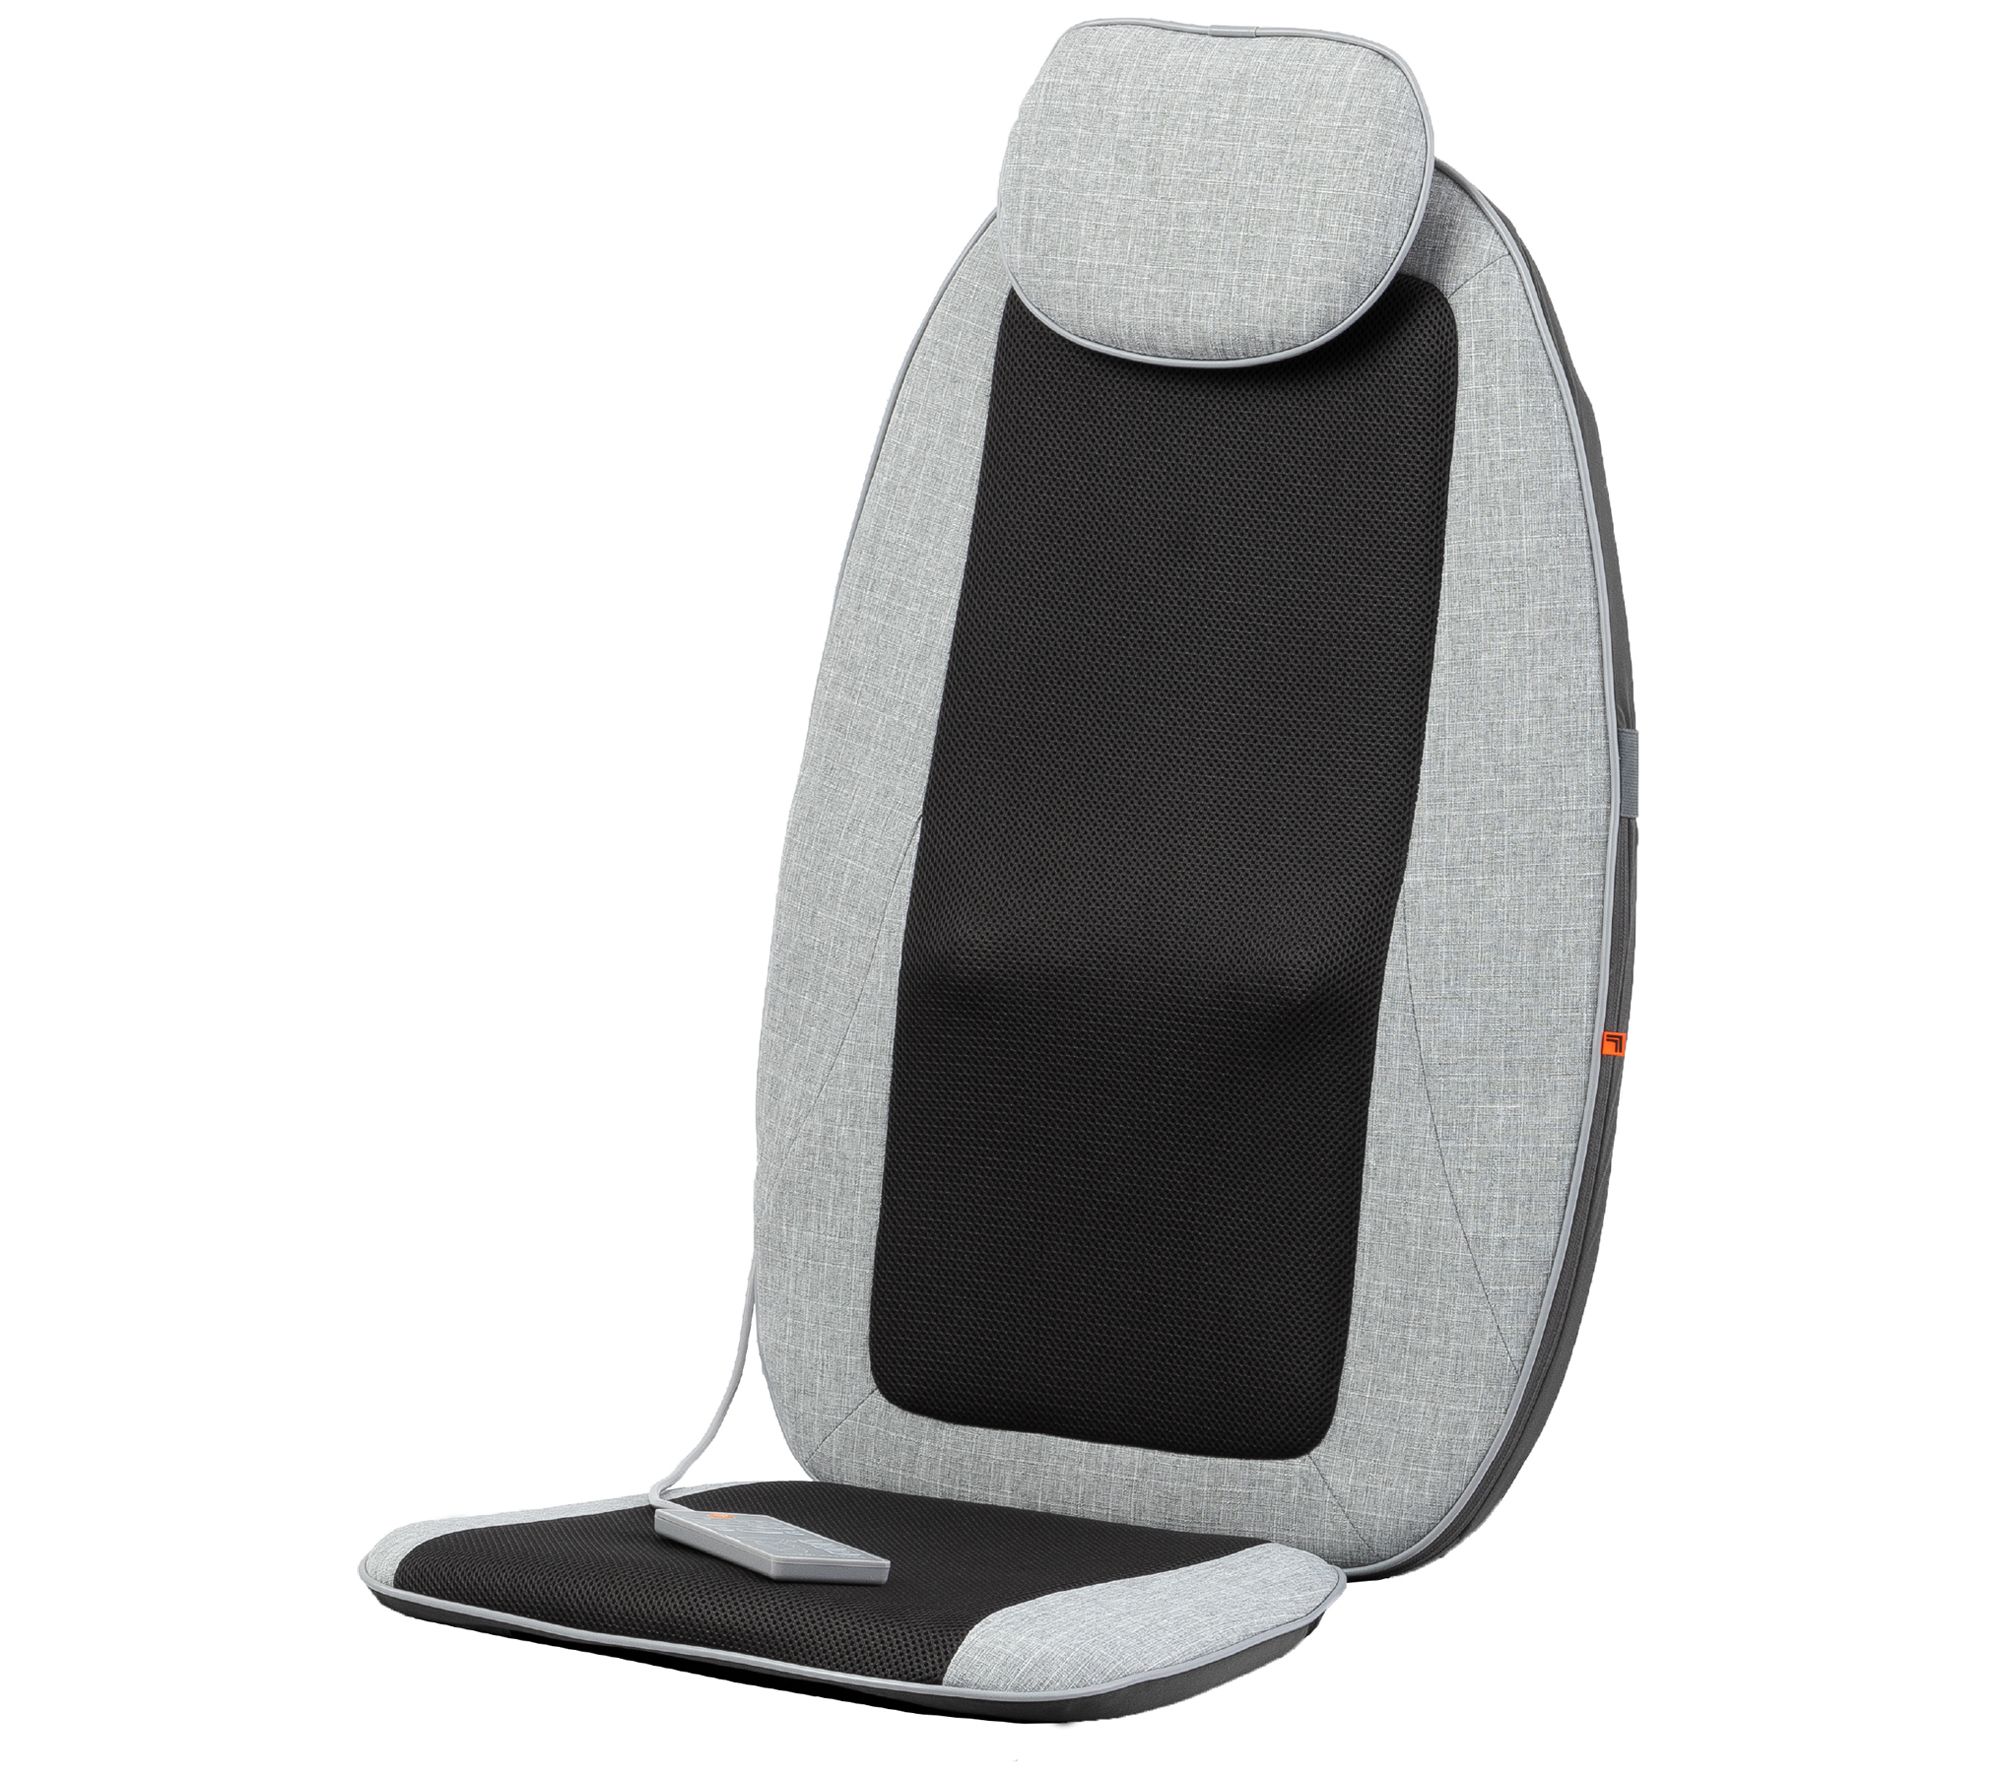 HoMedics Massage Cushion, Portable Shaitsu Pro Back Massager with Heat and  12 Massage Nodes for your Office Chair, Bed, or Couch